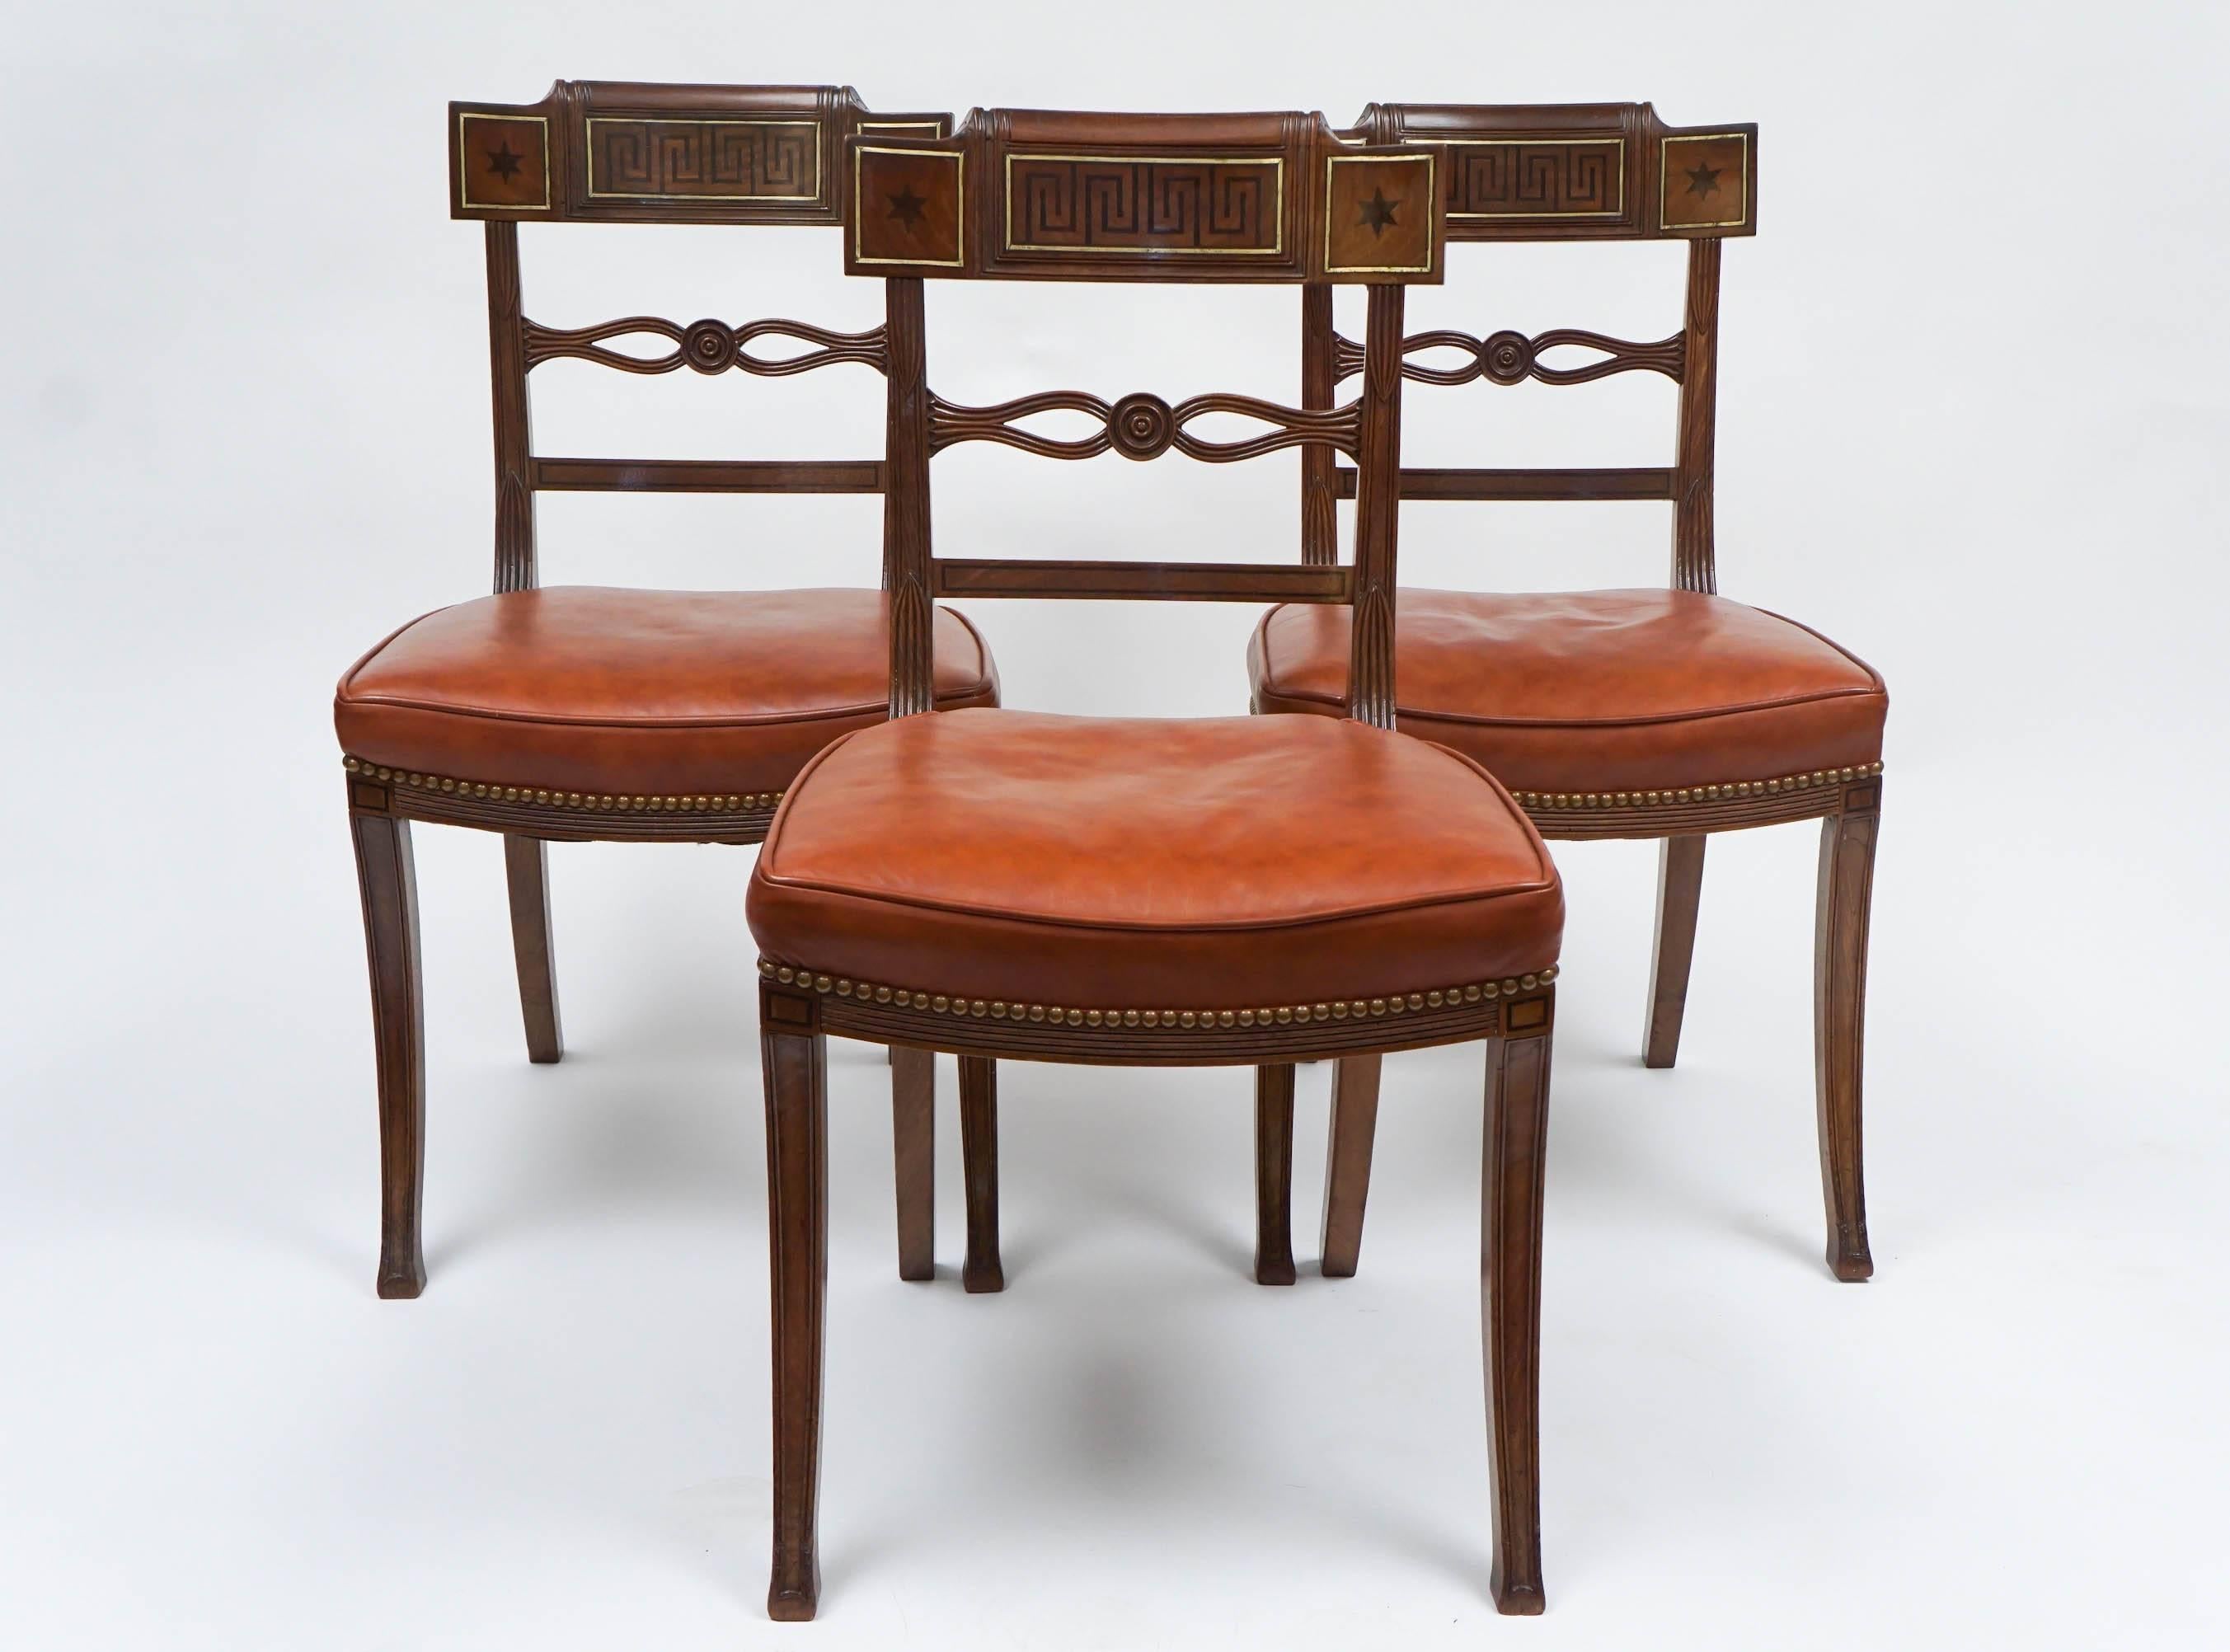 Rare and remarkable set of six, circa 1805, neoclassical English Regency dining chairs having mahogany frame of klismos form, the crest rail divided in three sections with 'Greek key' and star ebony inlay inside brass inlaid borders surmounting